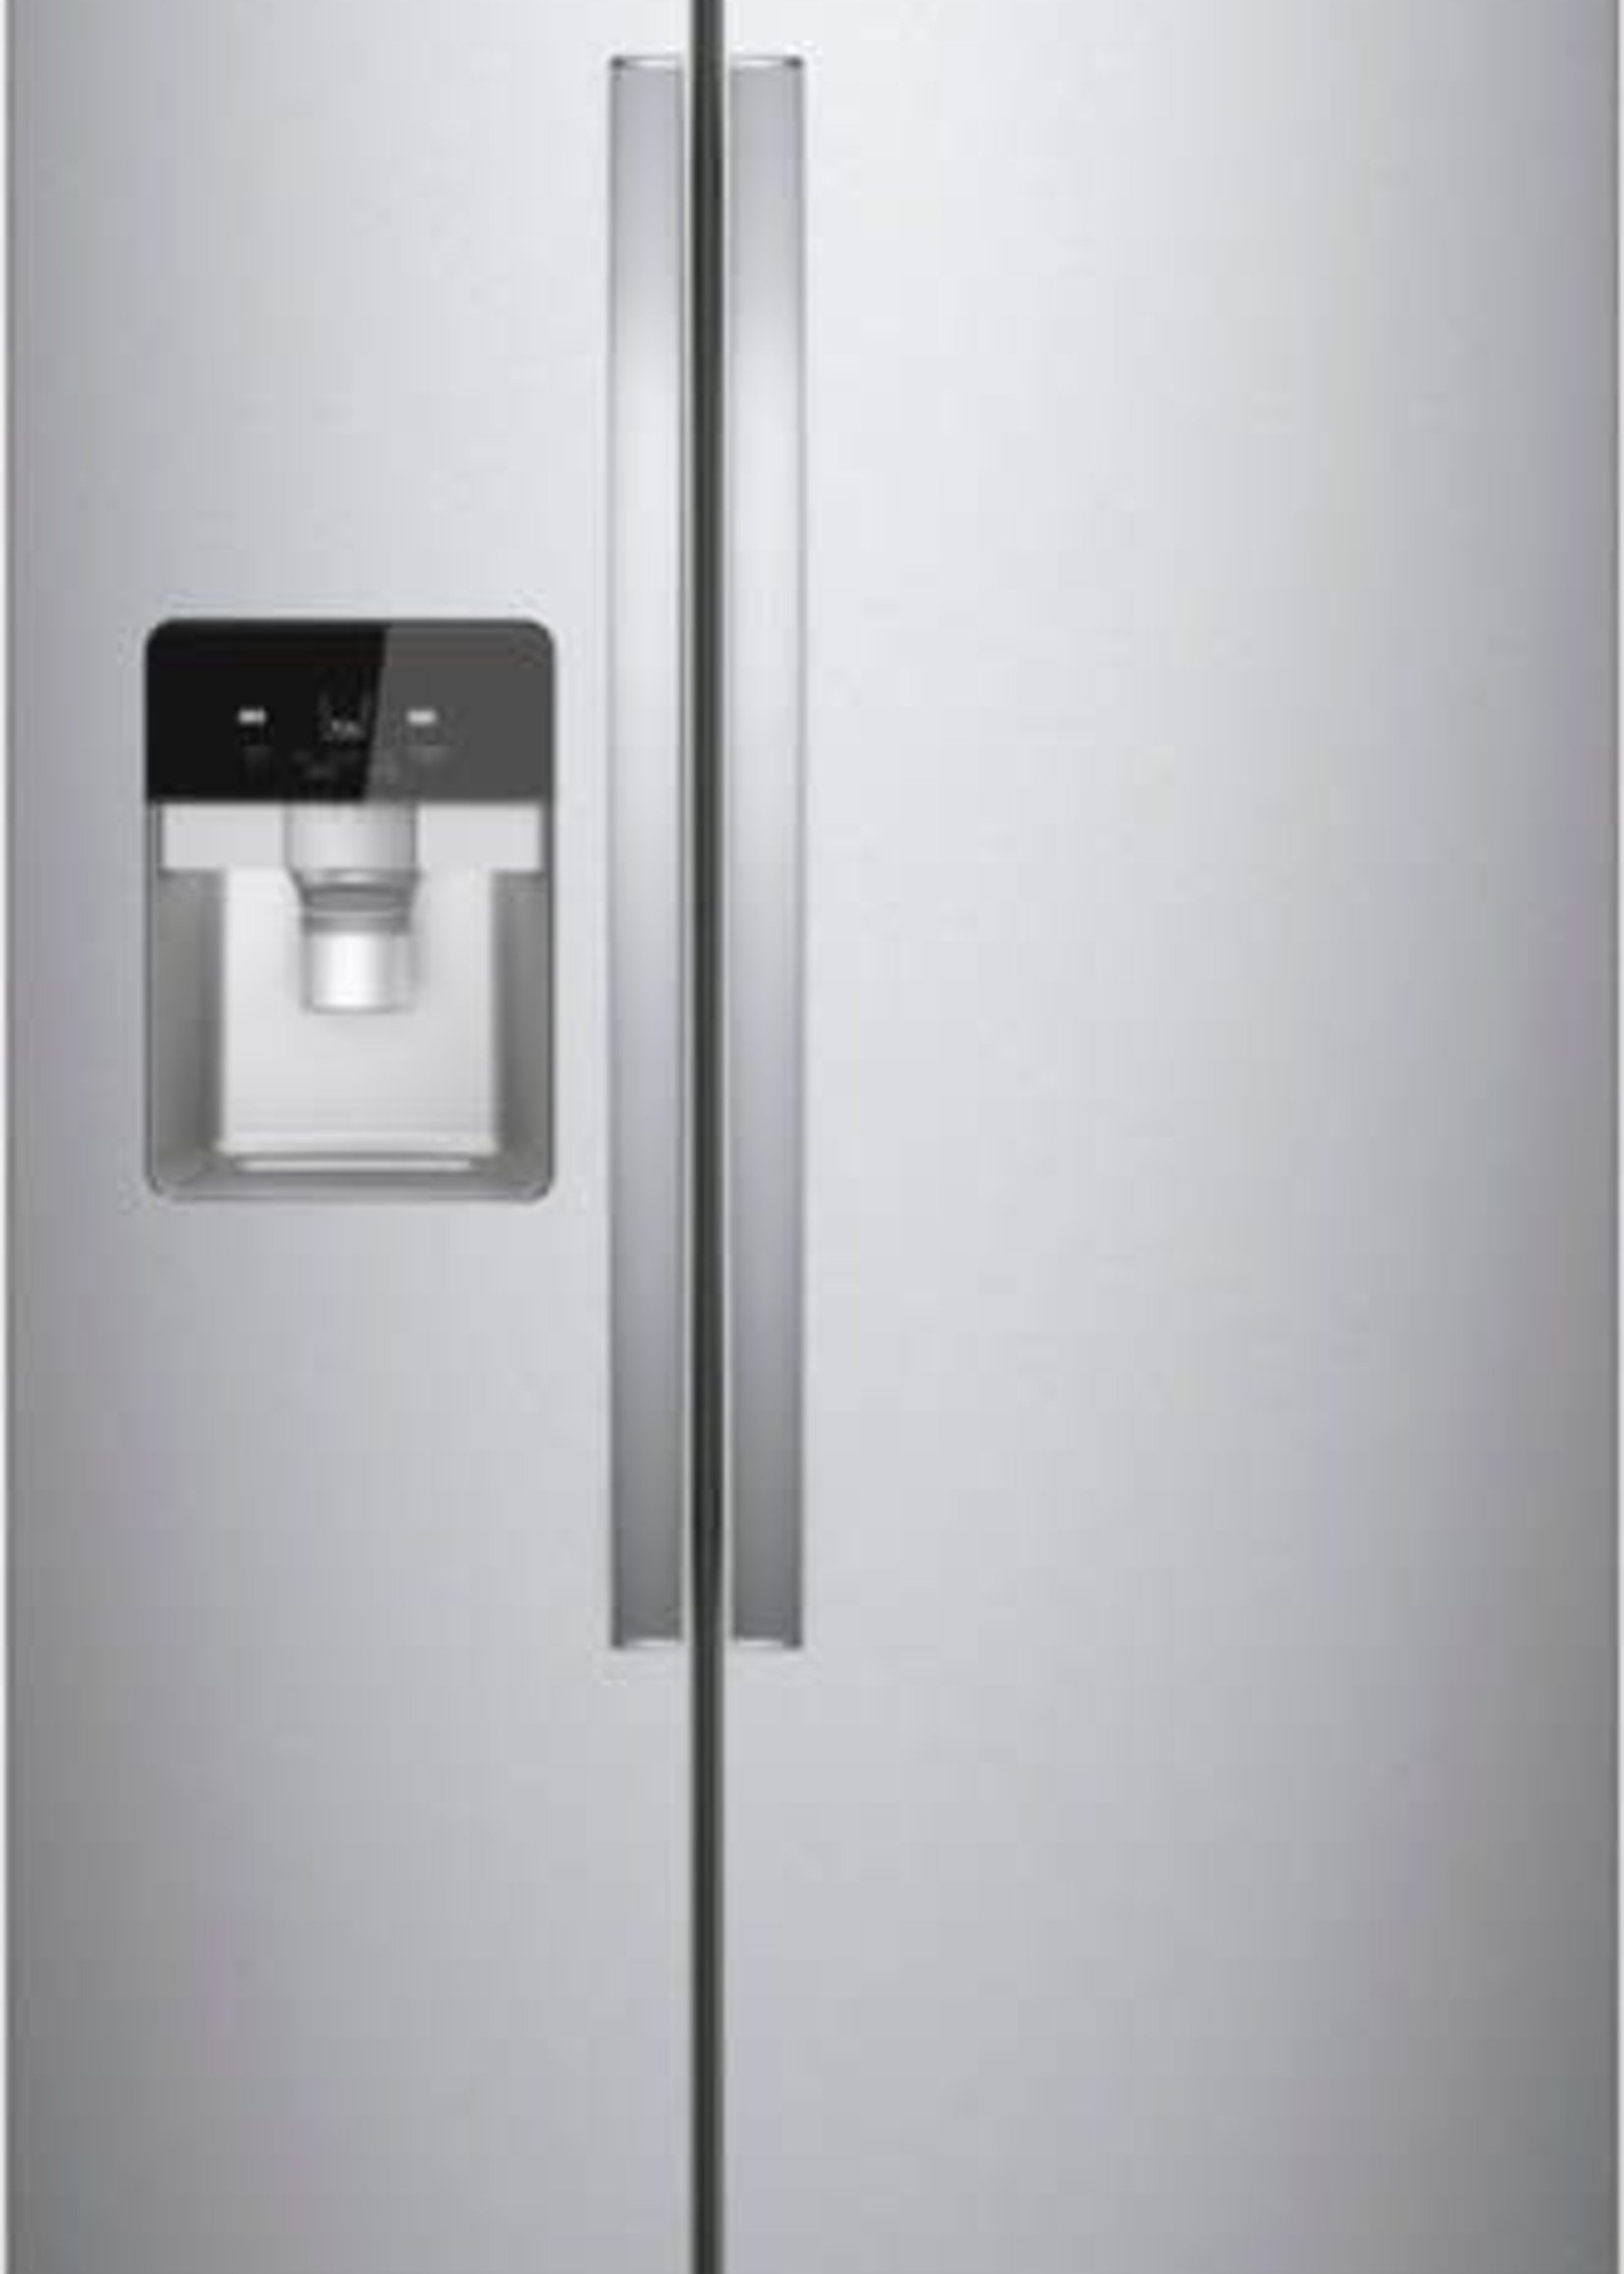 Whirlpool *Whirlpool WRS321SDHZ  21.4-cu ft Side-by-Side Refrigerator with Ice Maker (Fingerprint-Resistant Stainless Steel)